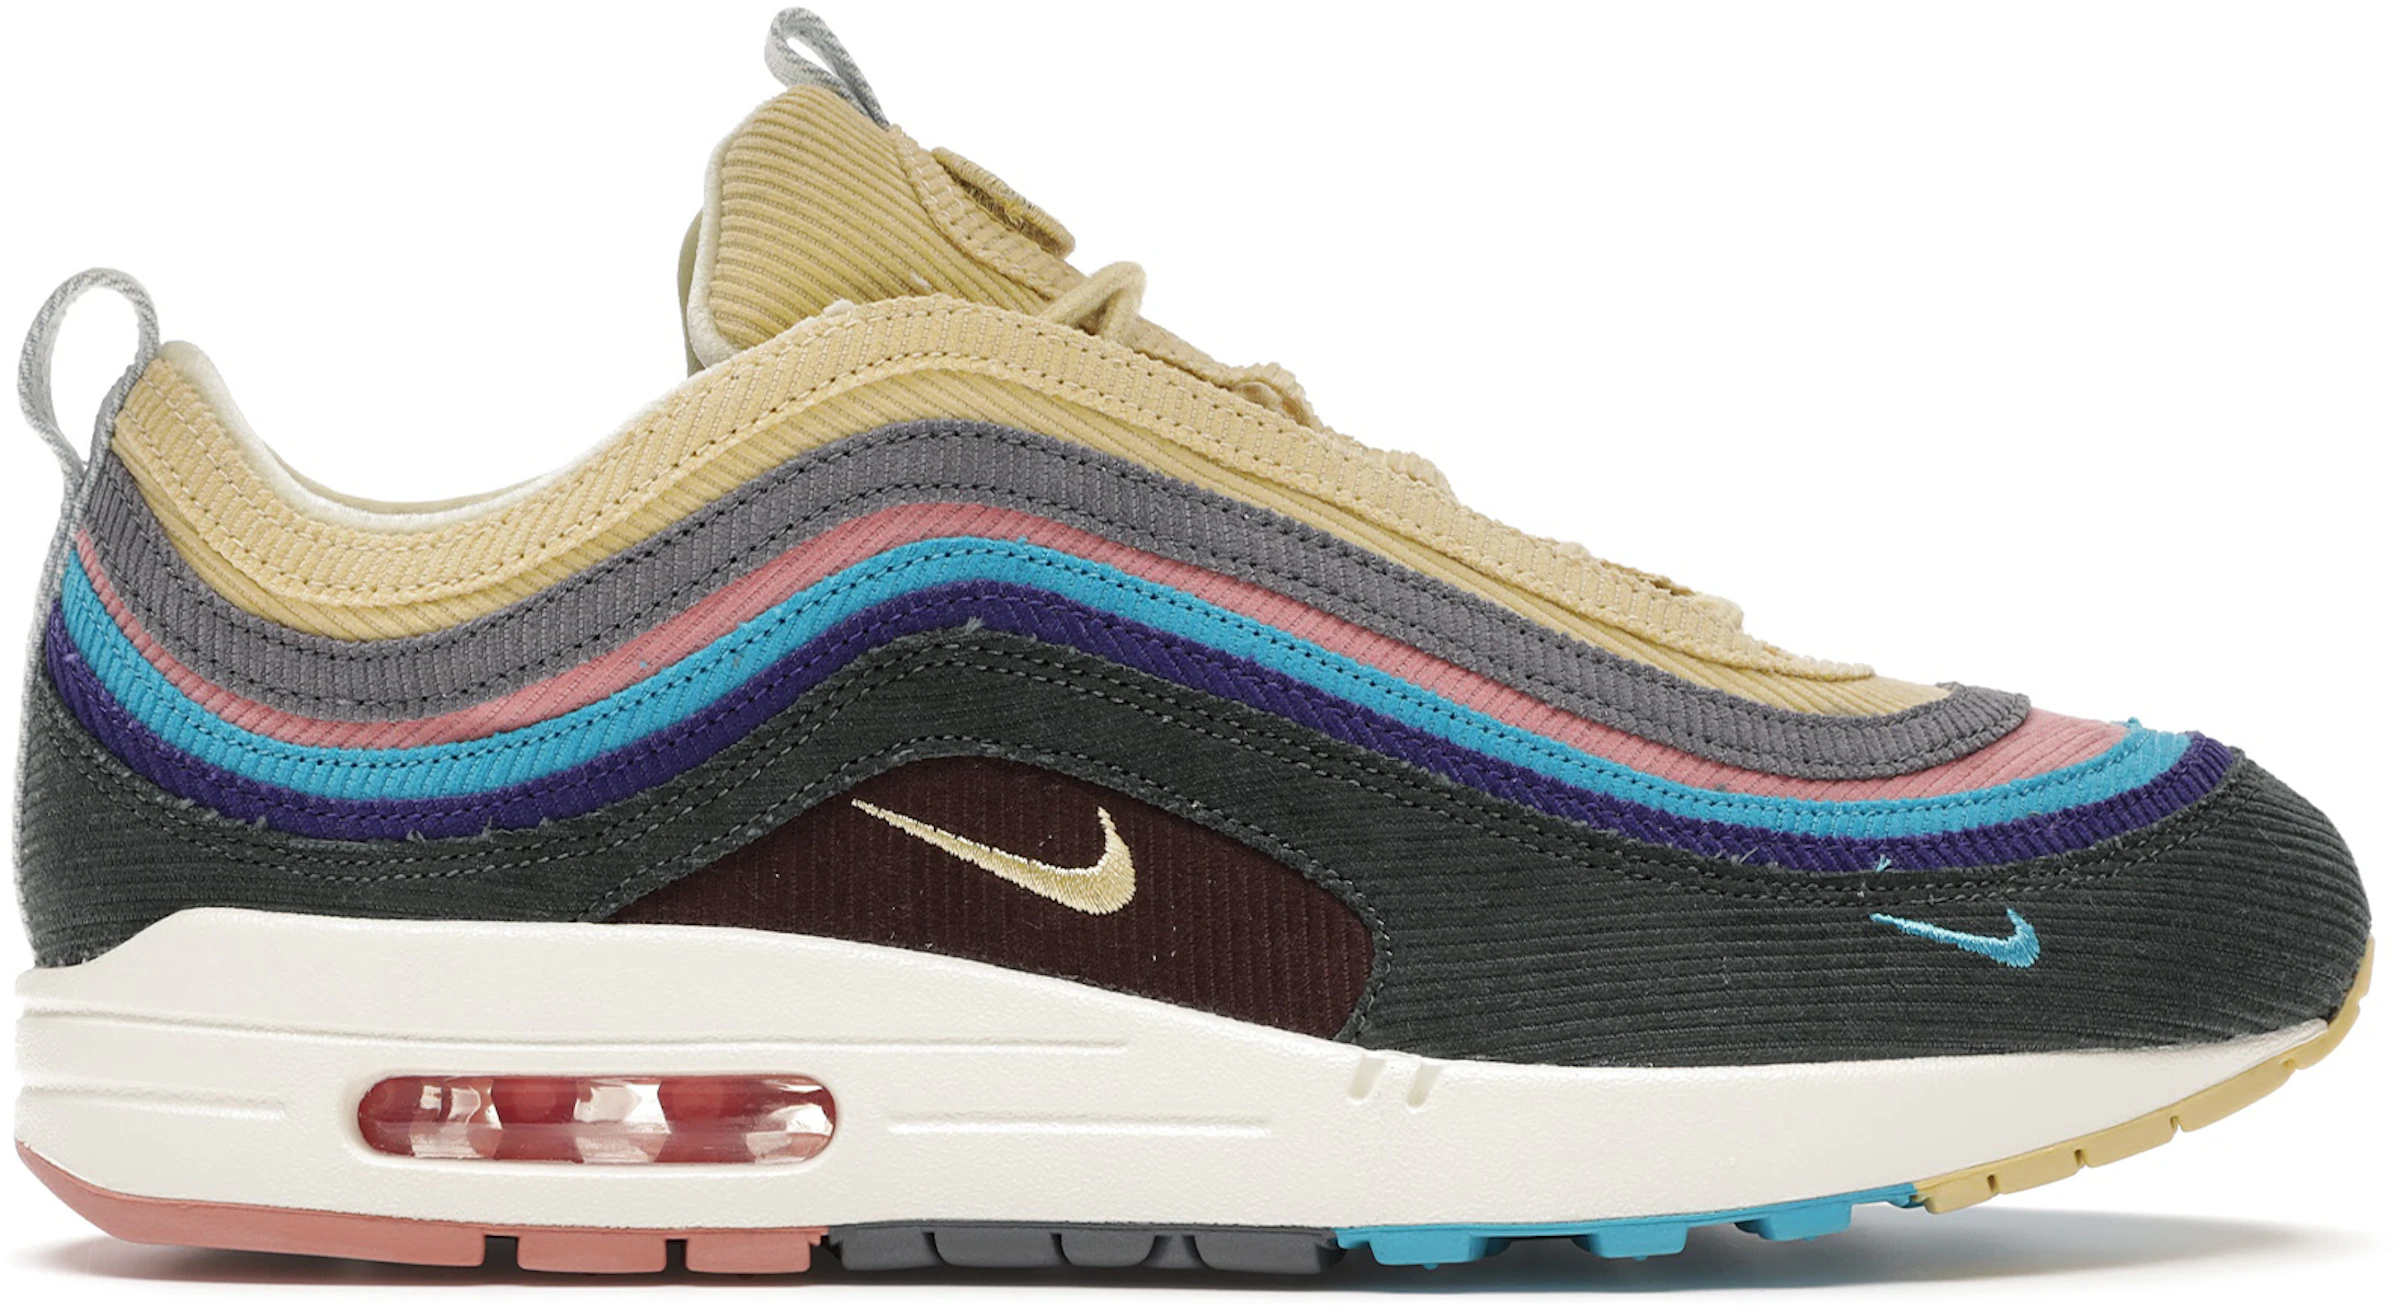 Nike Air Max 1/97 Wotherspoon Accessories and Dustbag) - AJ4219-400 ES